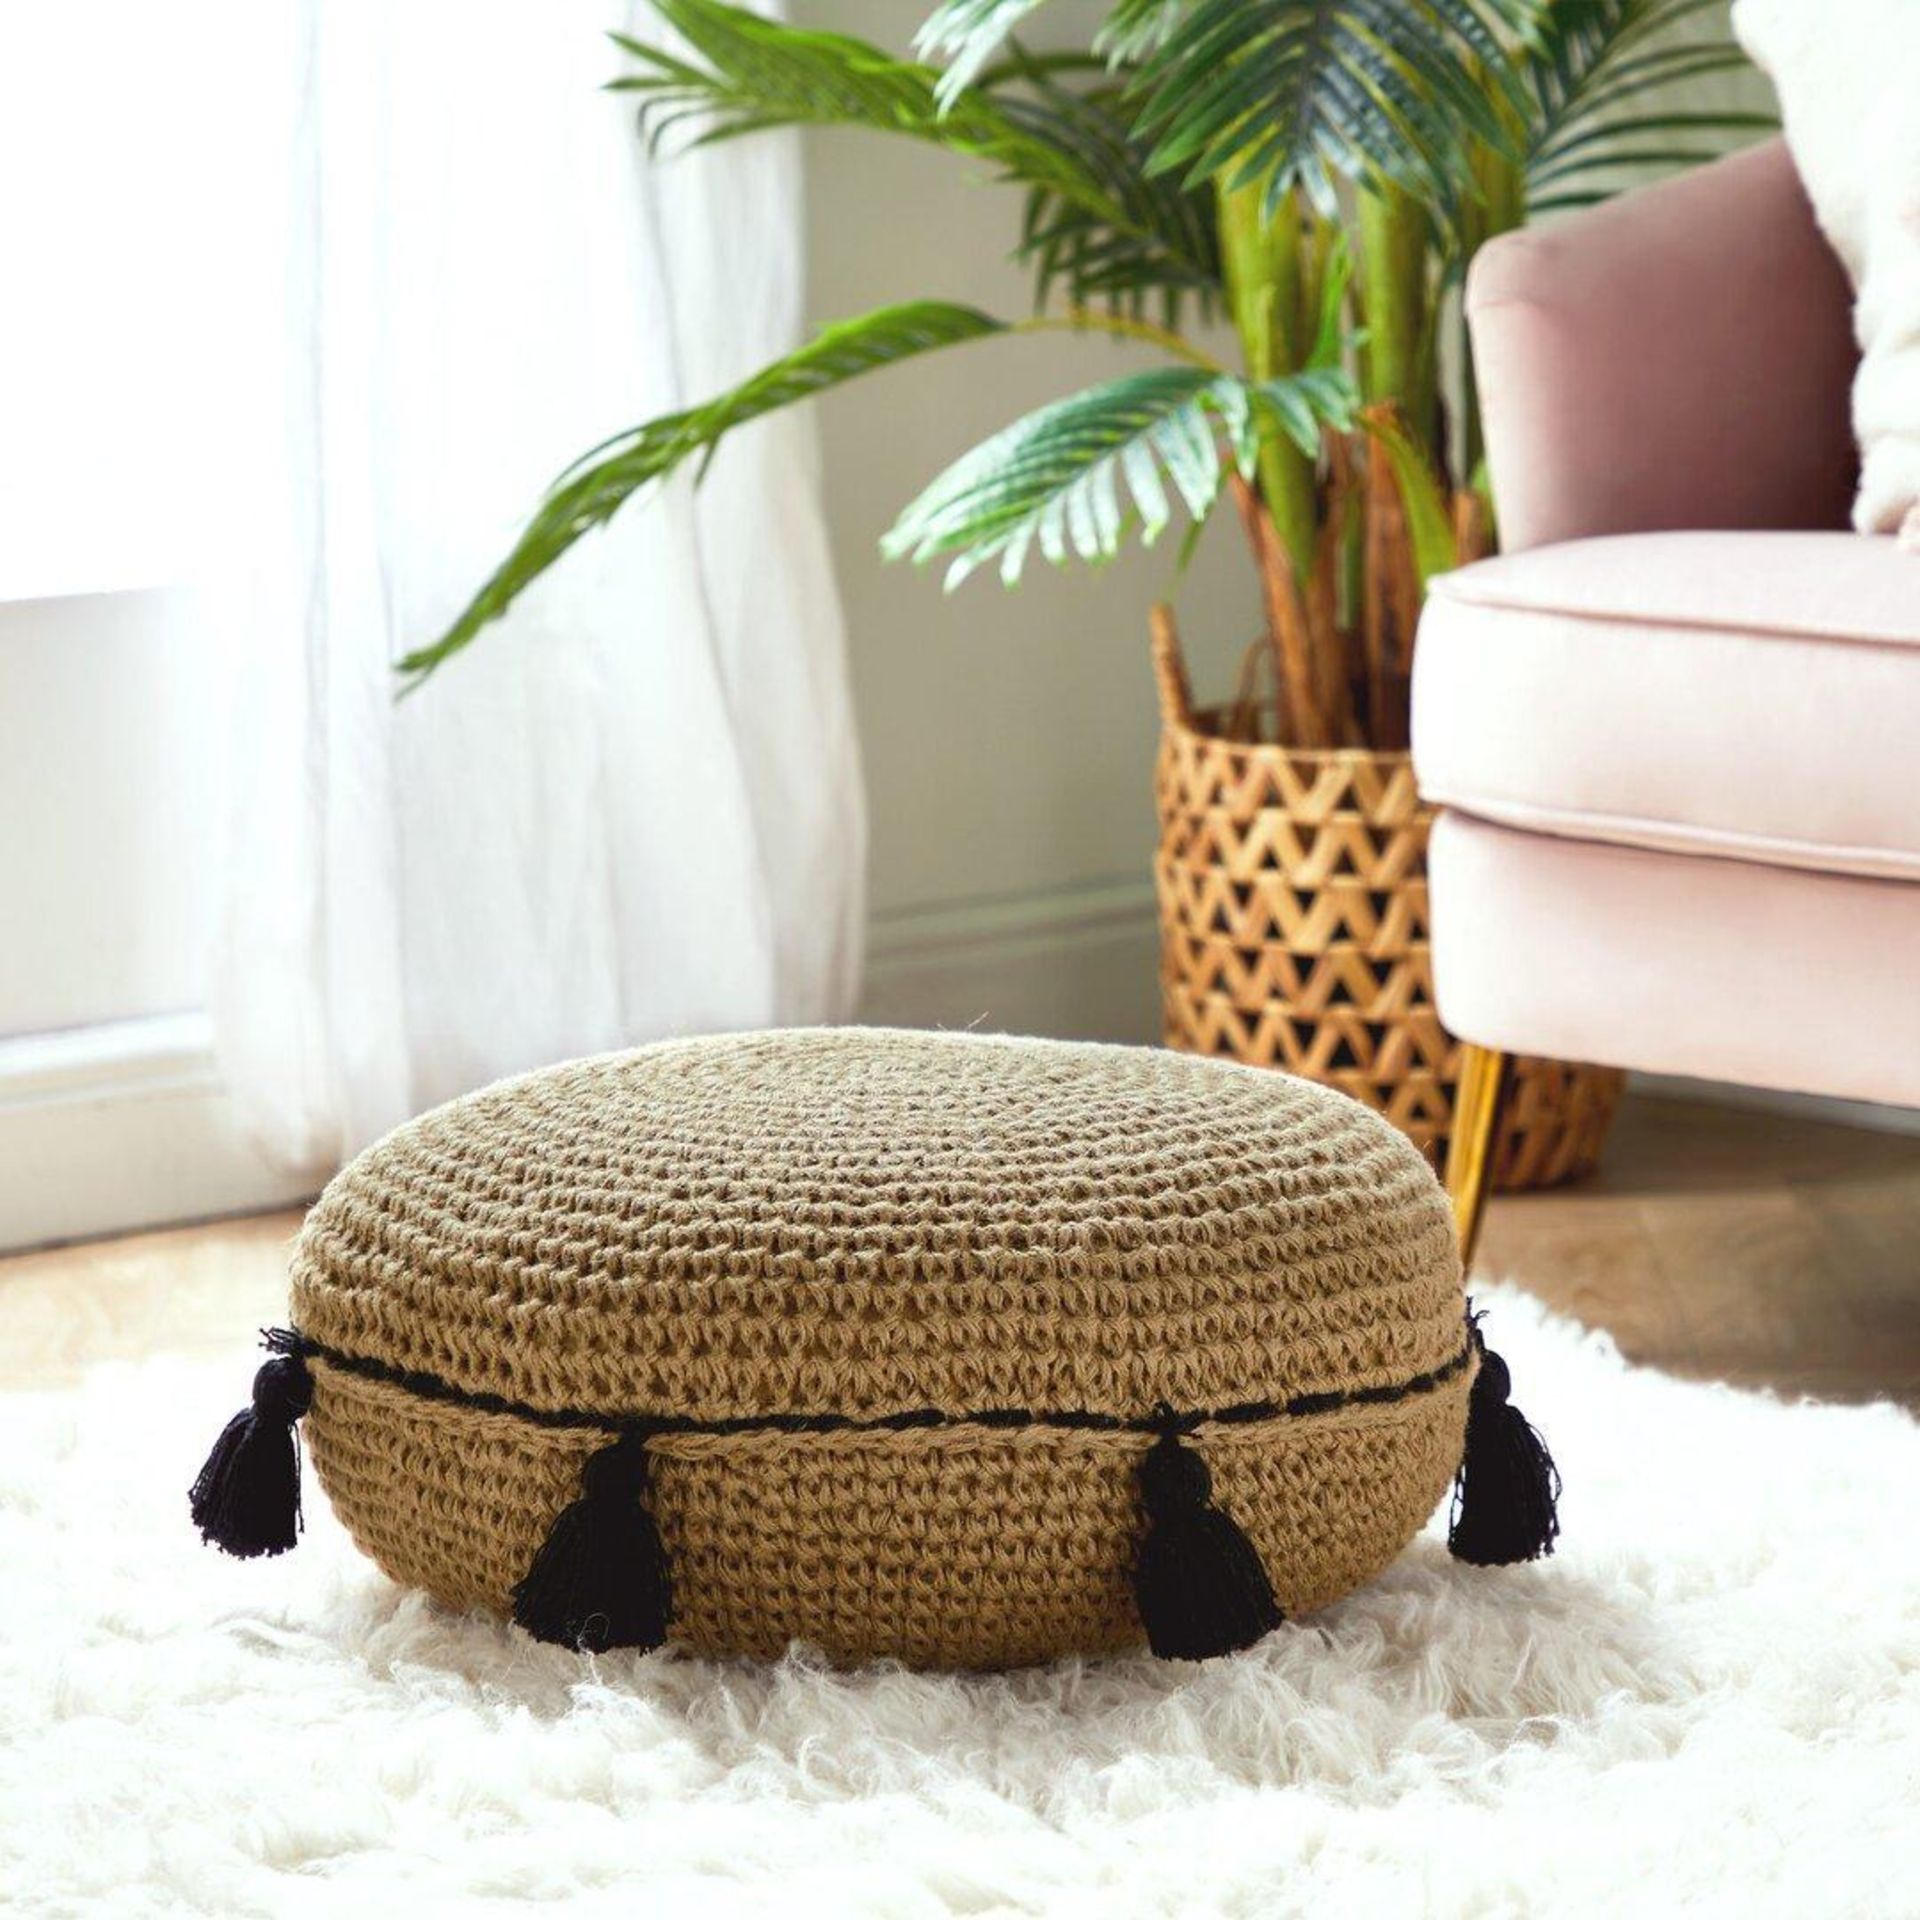 Jute Tassel Floor Cushion - S2. Jute Tassel Floor CushionAdd a touch of unique style to your